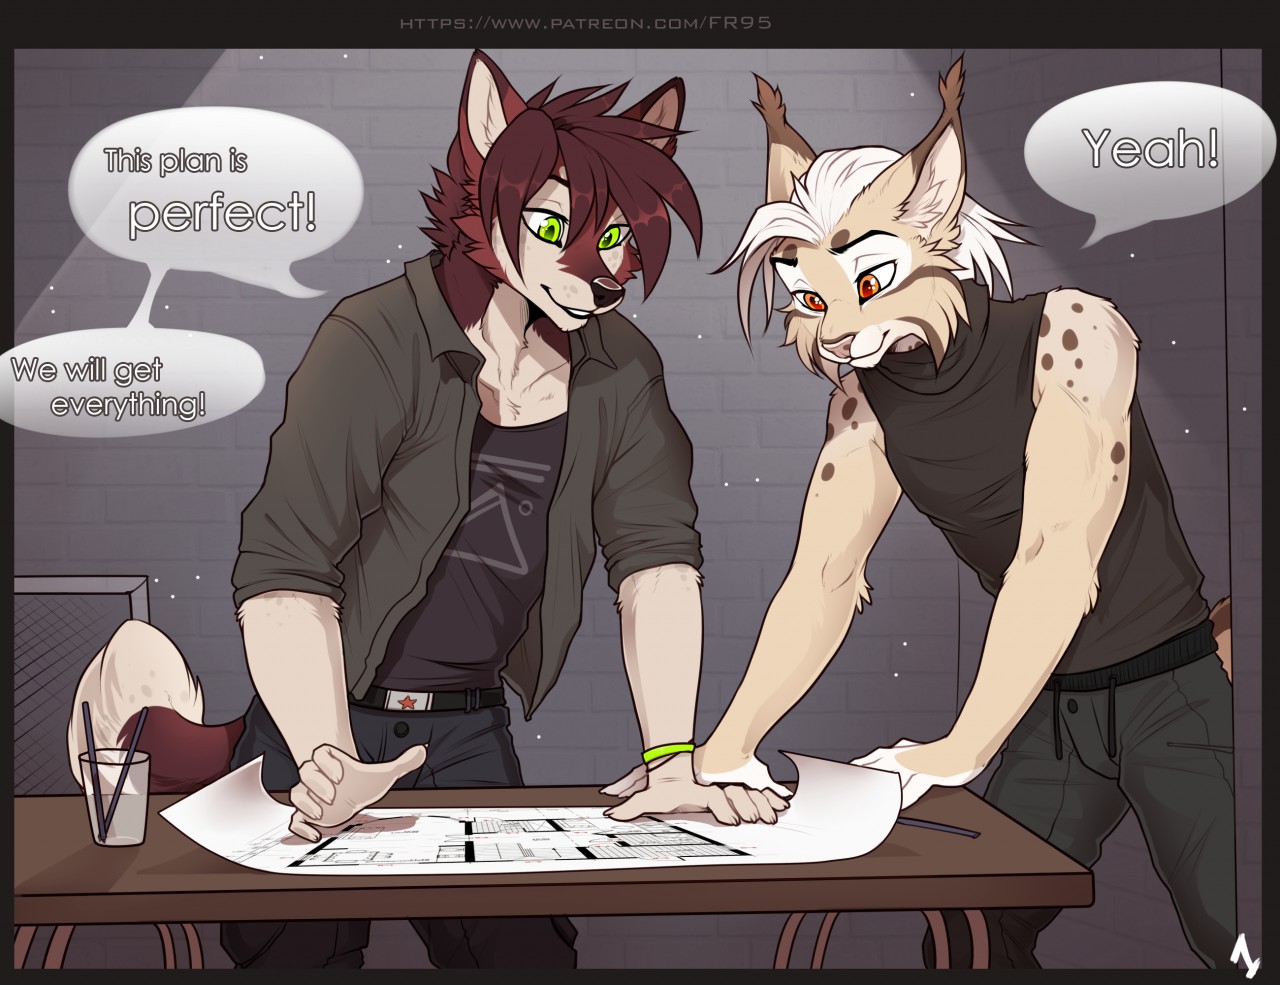 straight-comics: The perfect Plan by Fr95   Find Fr95 on Furaffinity